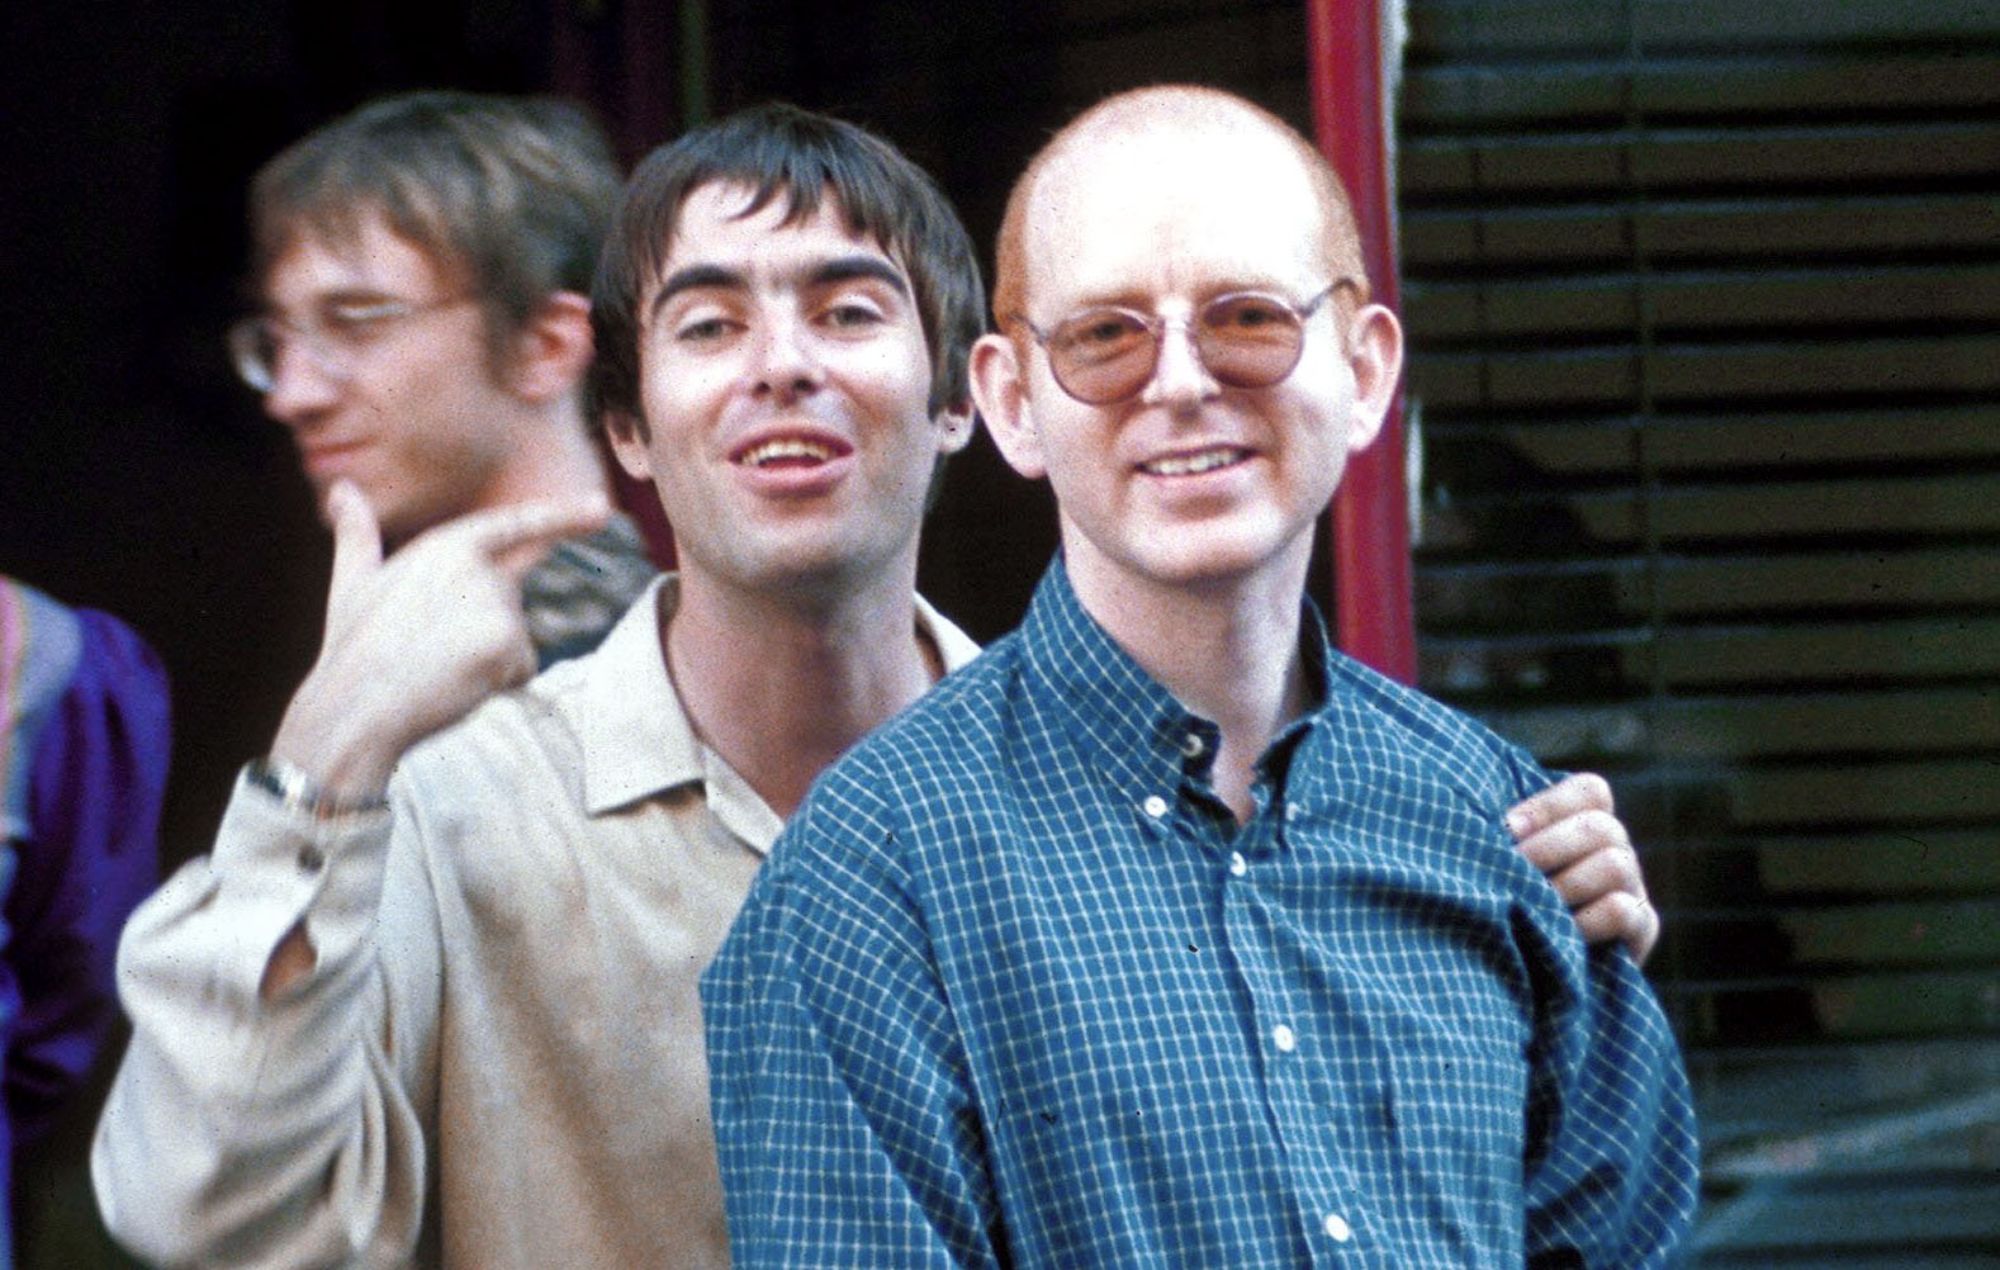 Former Oasis manager Alan McGee shares story behind legendary photo with Liam Gallagher